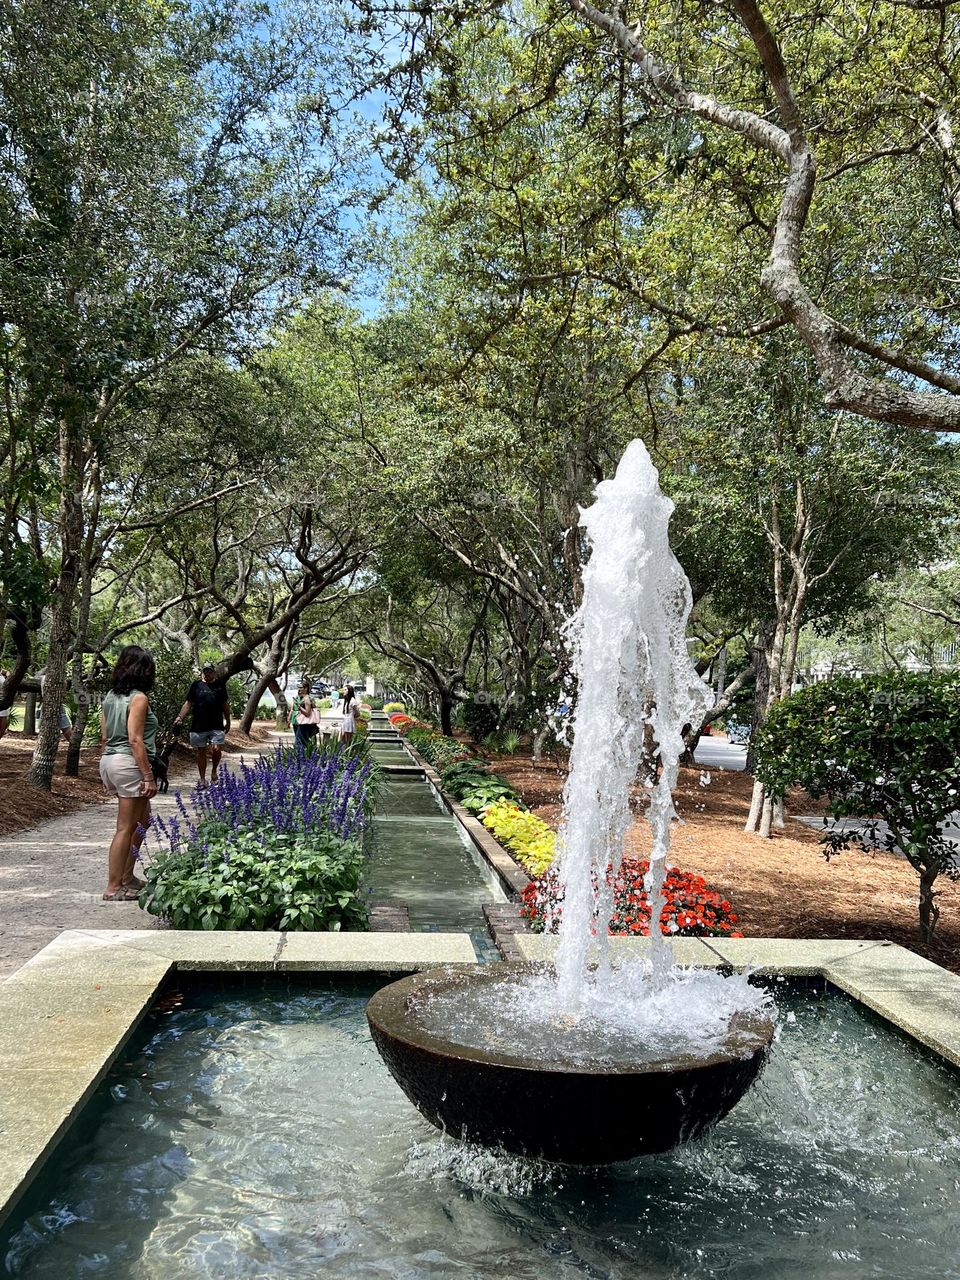 Bubbling fountain in foreground on a sunny day. Background in city park with trees, gravel walking path, and spring blooming plants.